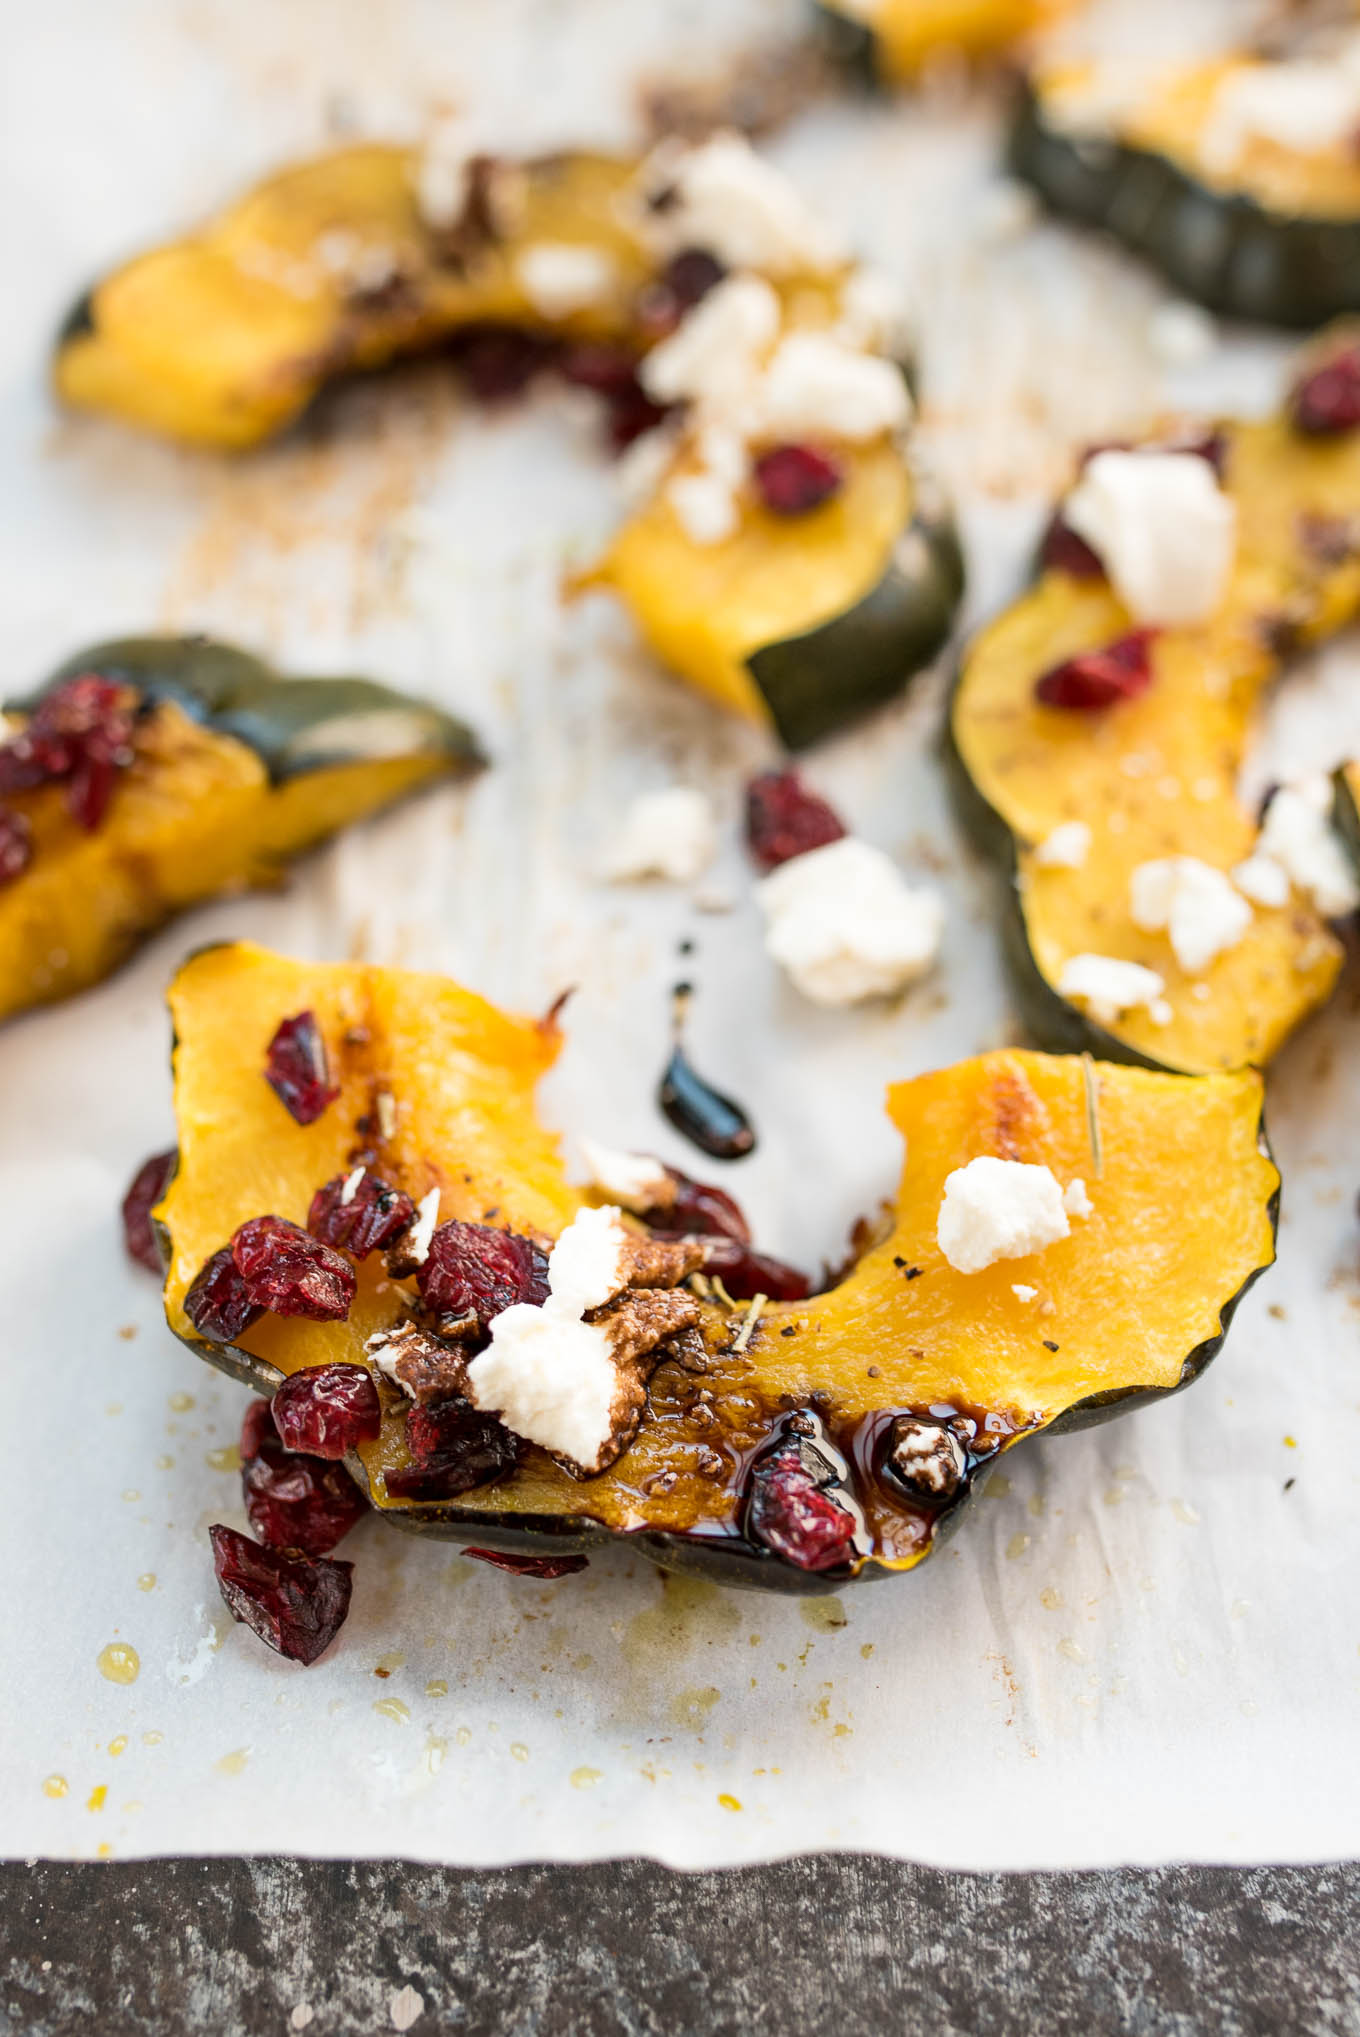 Roasted Acorn Squash with Cranberries, Goat Cheese and Balsamic Glaze #glutenfree #vegetarian side that will be perfect on your Holiday table | www.nutritiouseats.com 